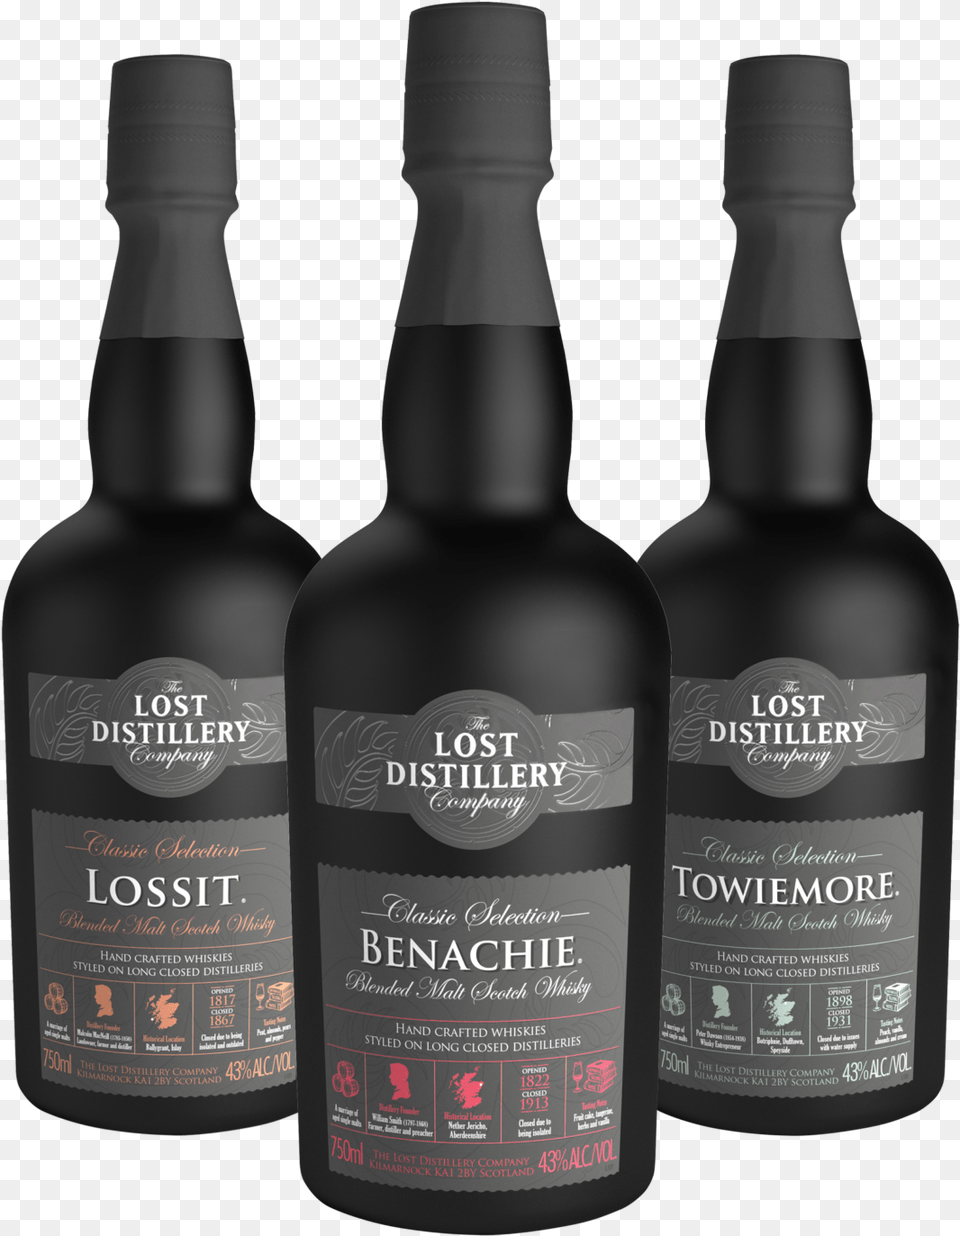 Towiemore Scotch Whisky Lossit Classic Selection The Lost Distillery Company, Alcohol, Beverage, Liquor, Bottle Free Png Download